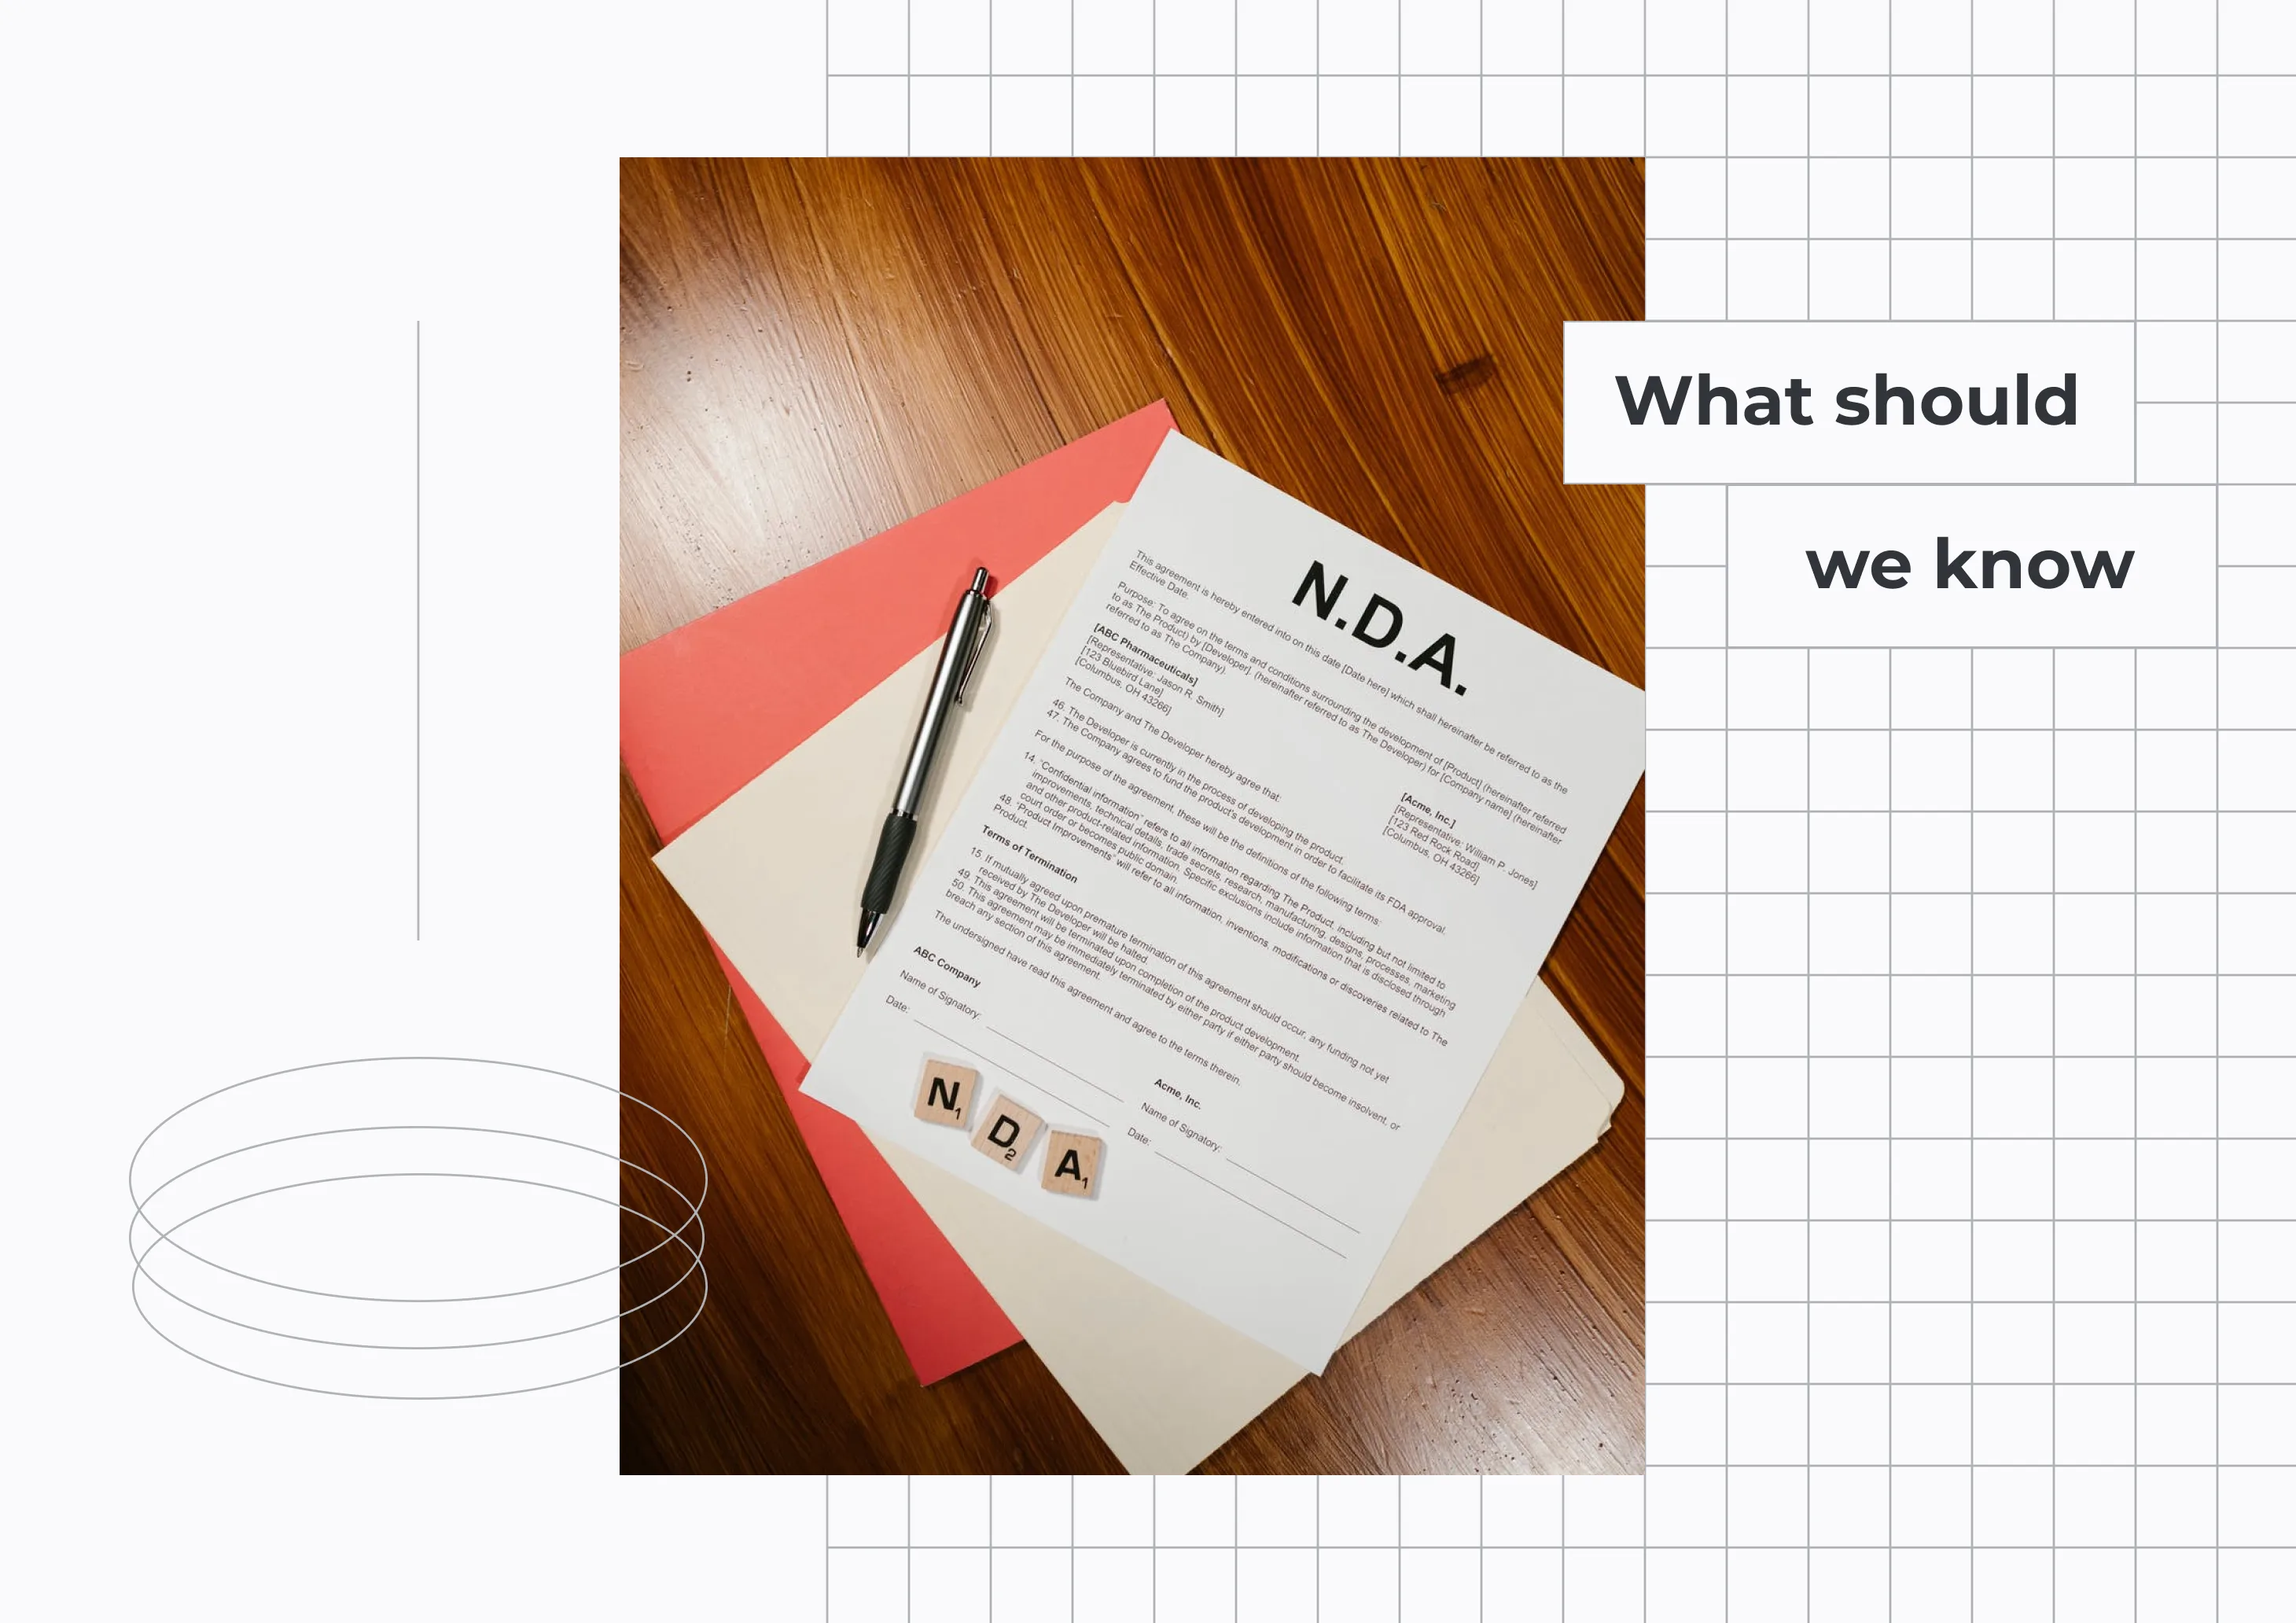 What should we know about NDA?